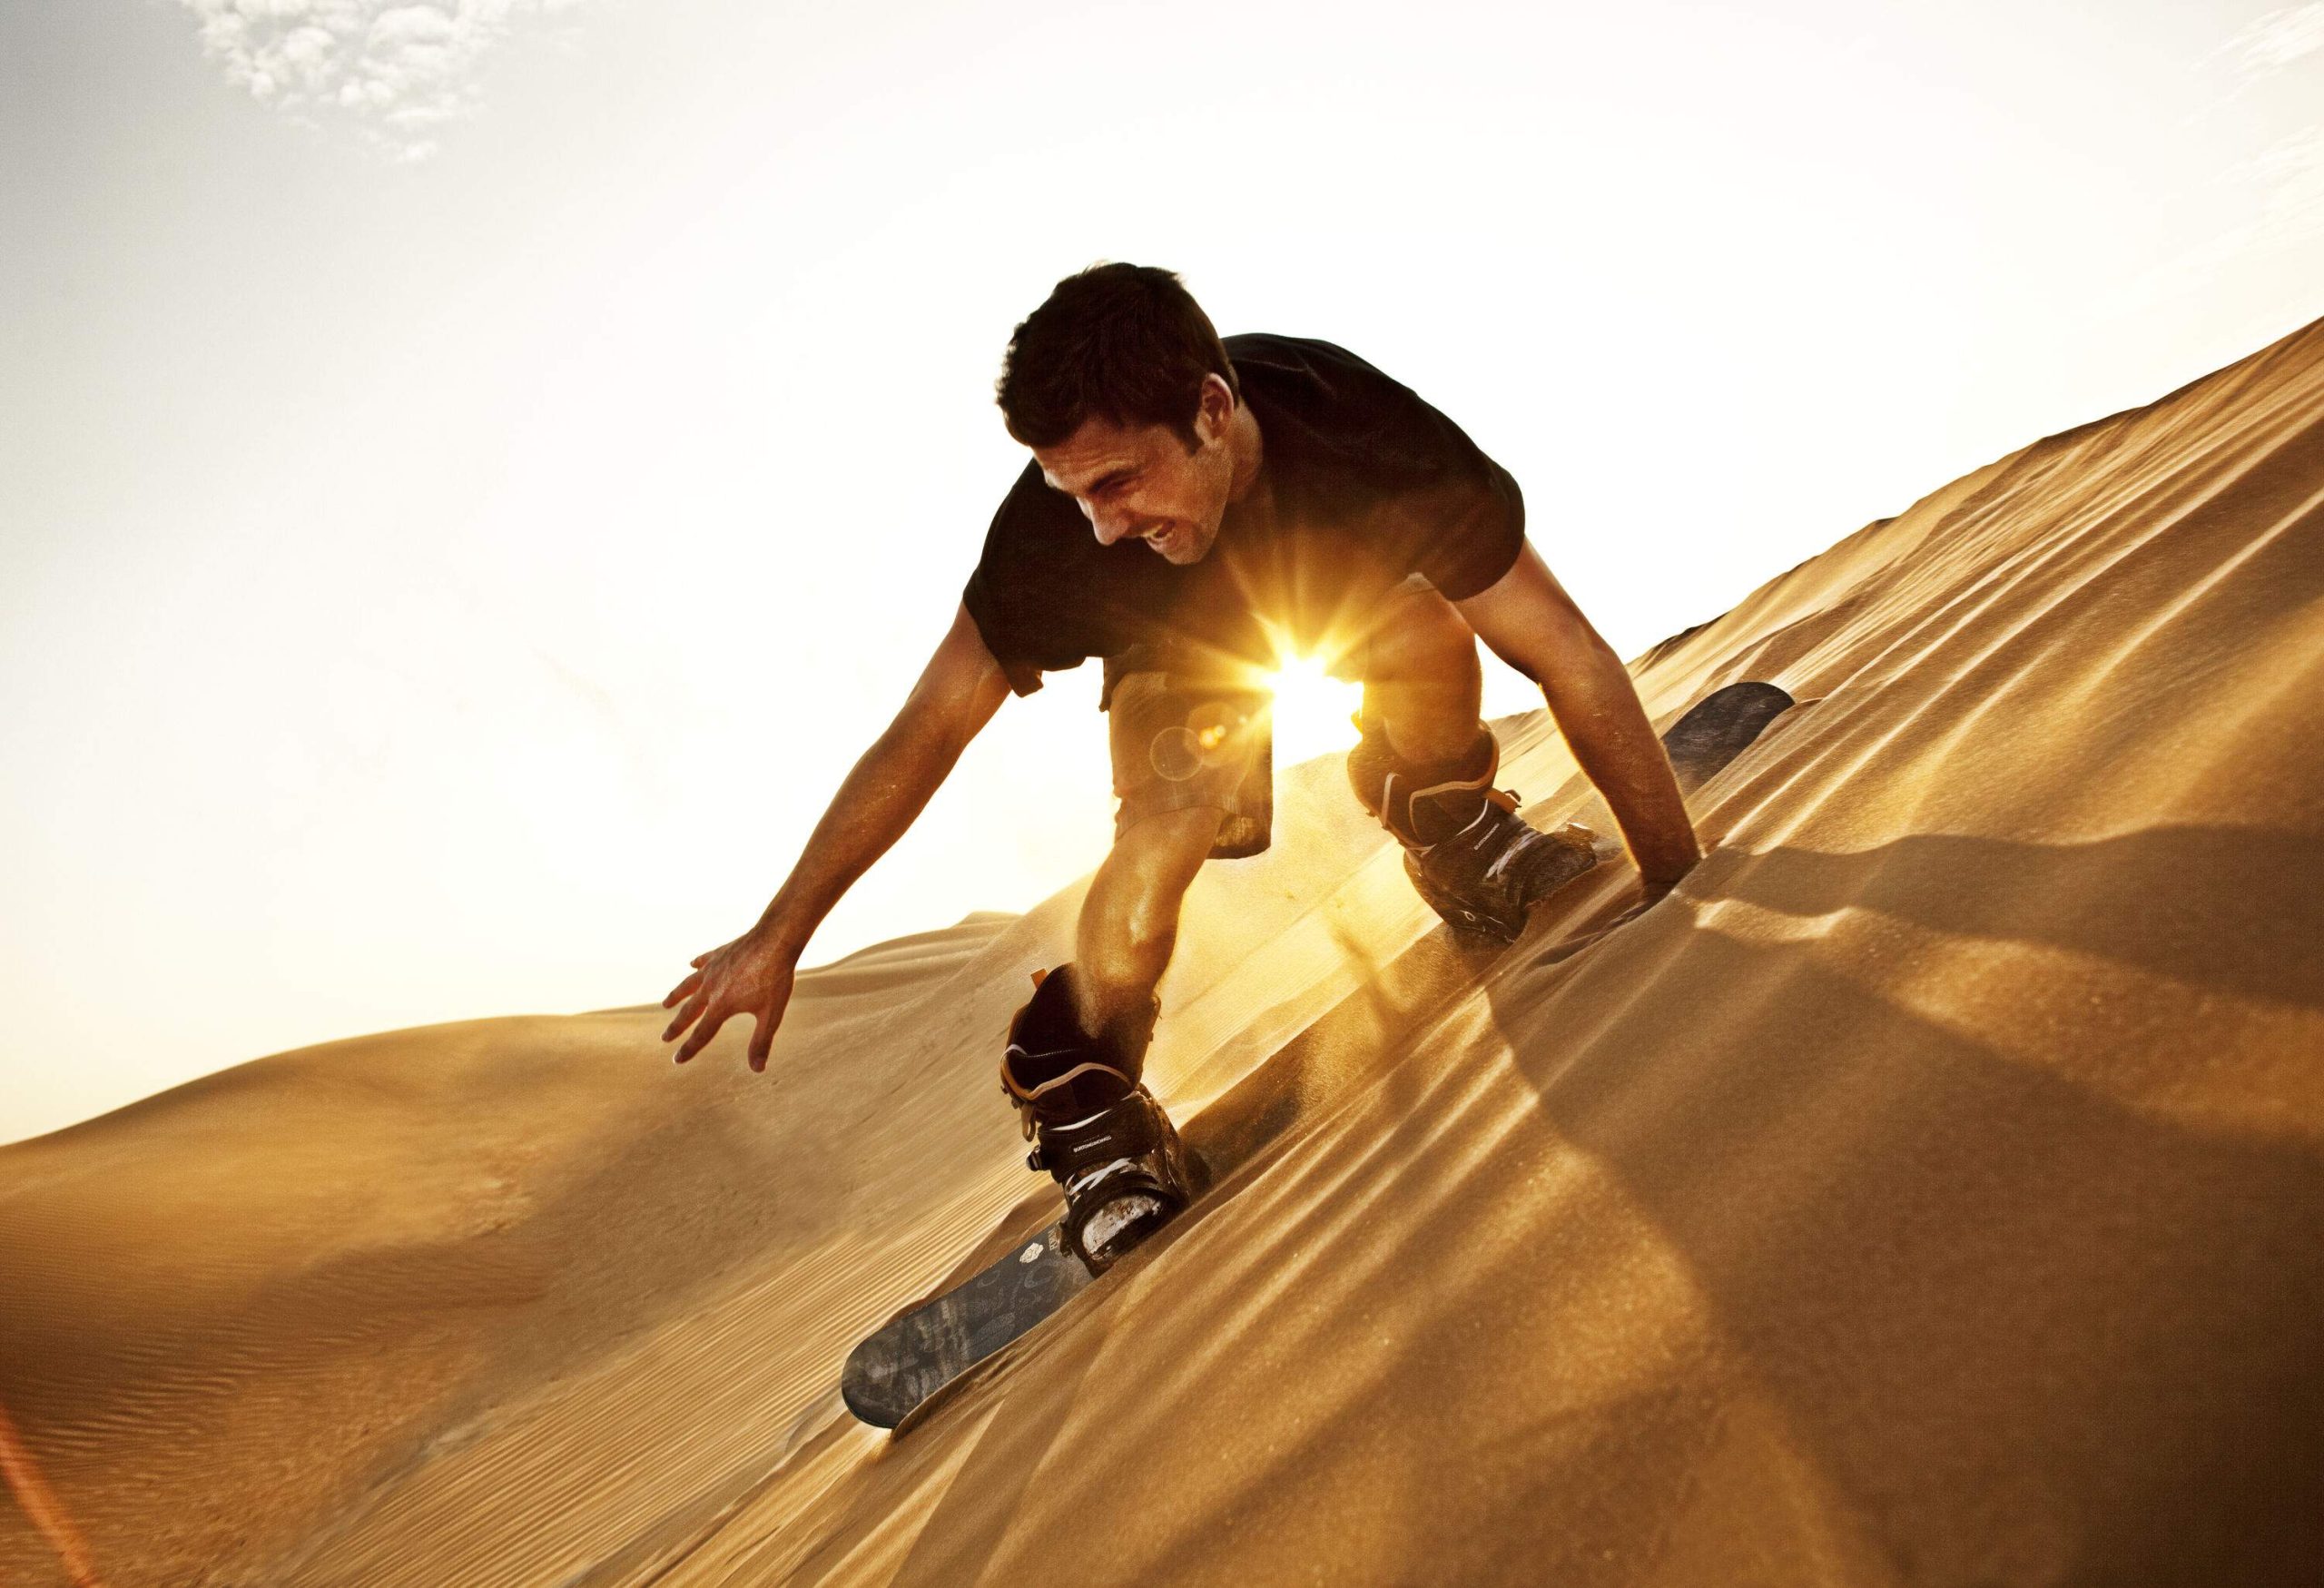 A man descends as he sandboards on the slope of the dunes.